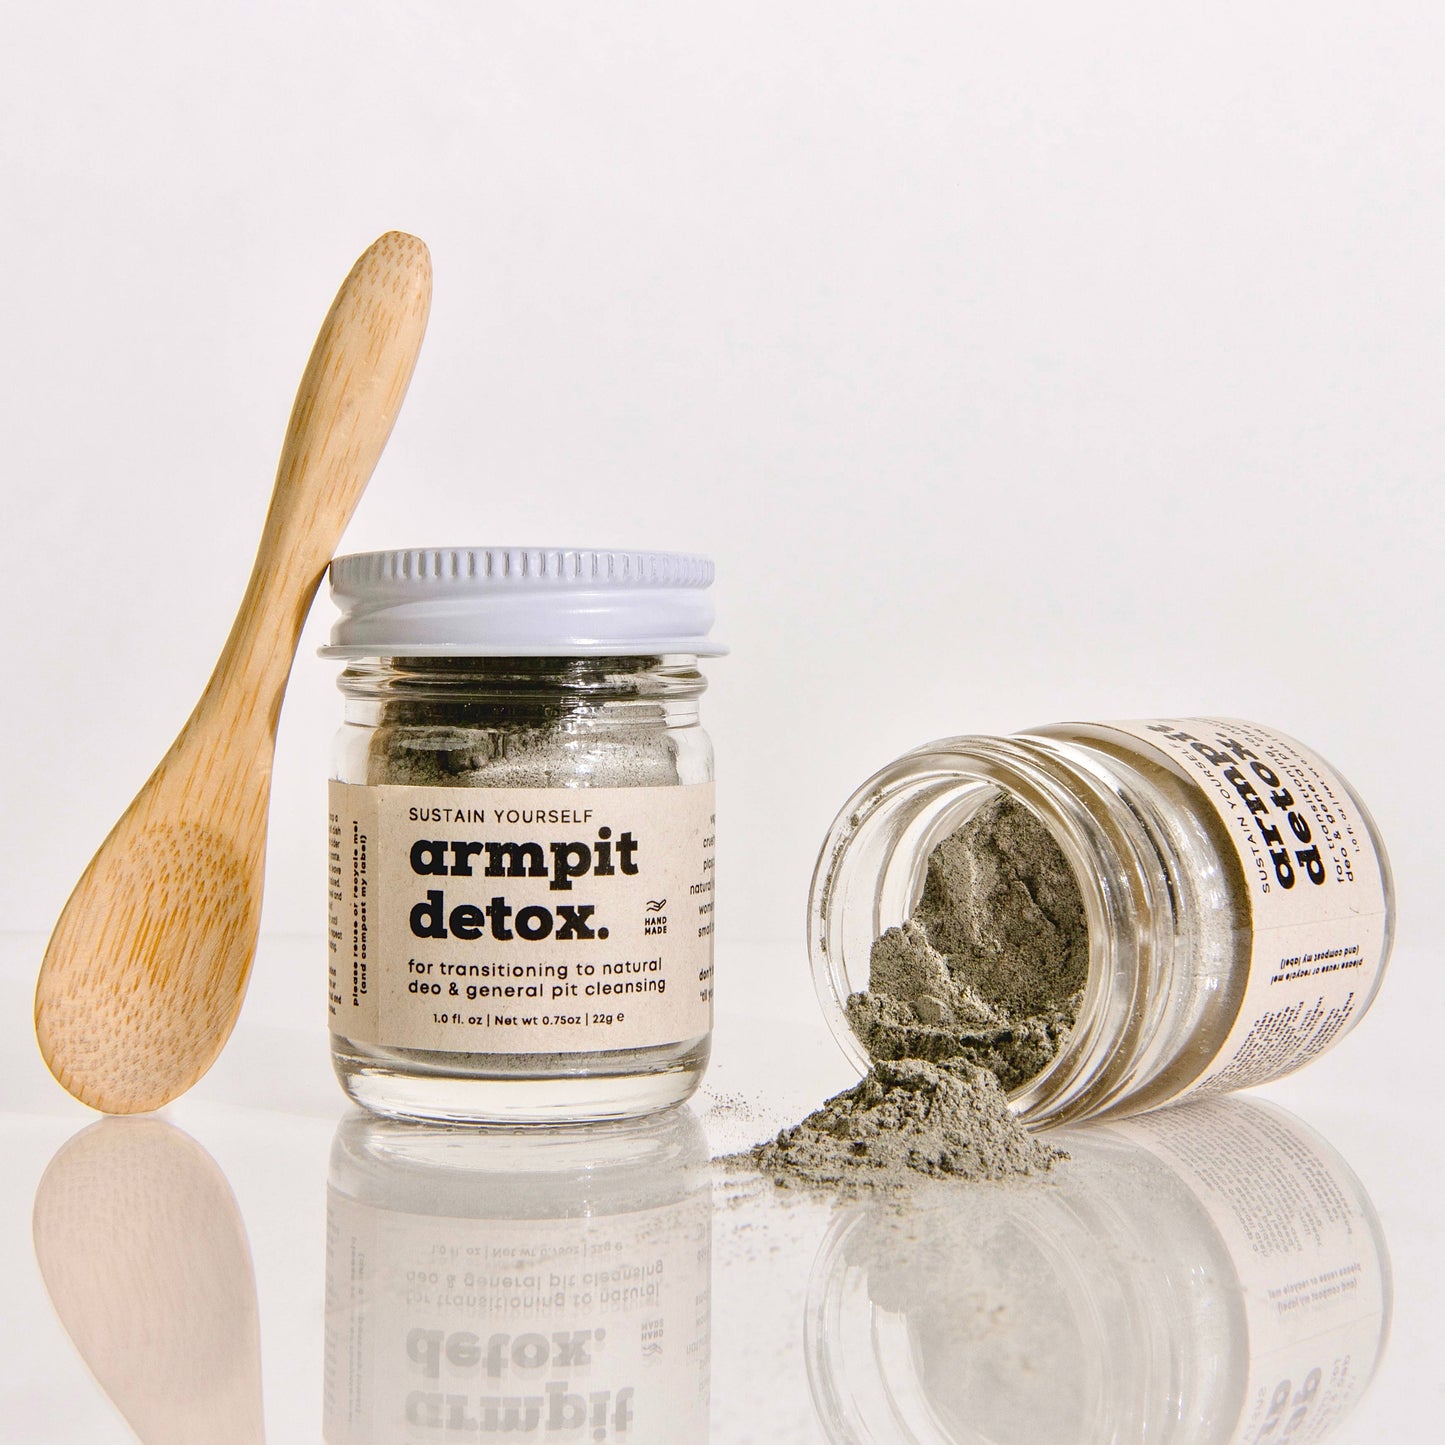 Sustain Yourself - armpit detox Sustain Yourself